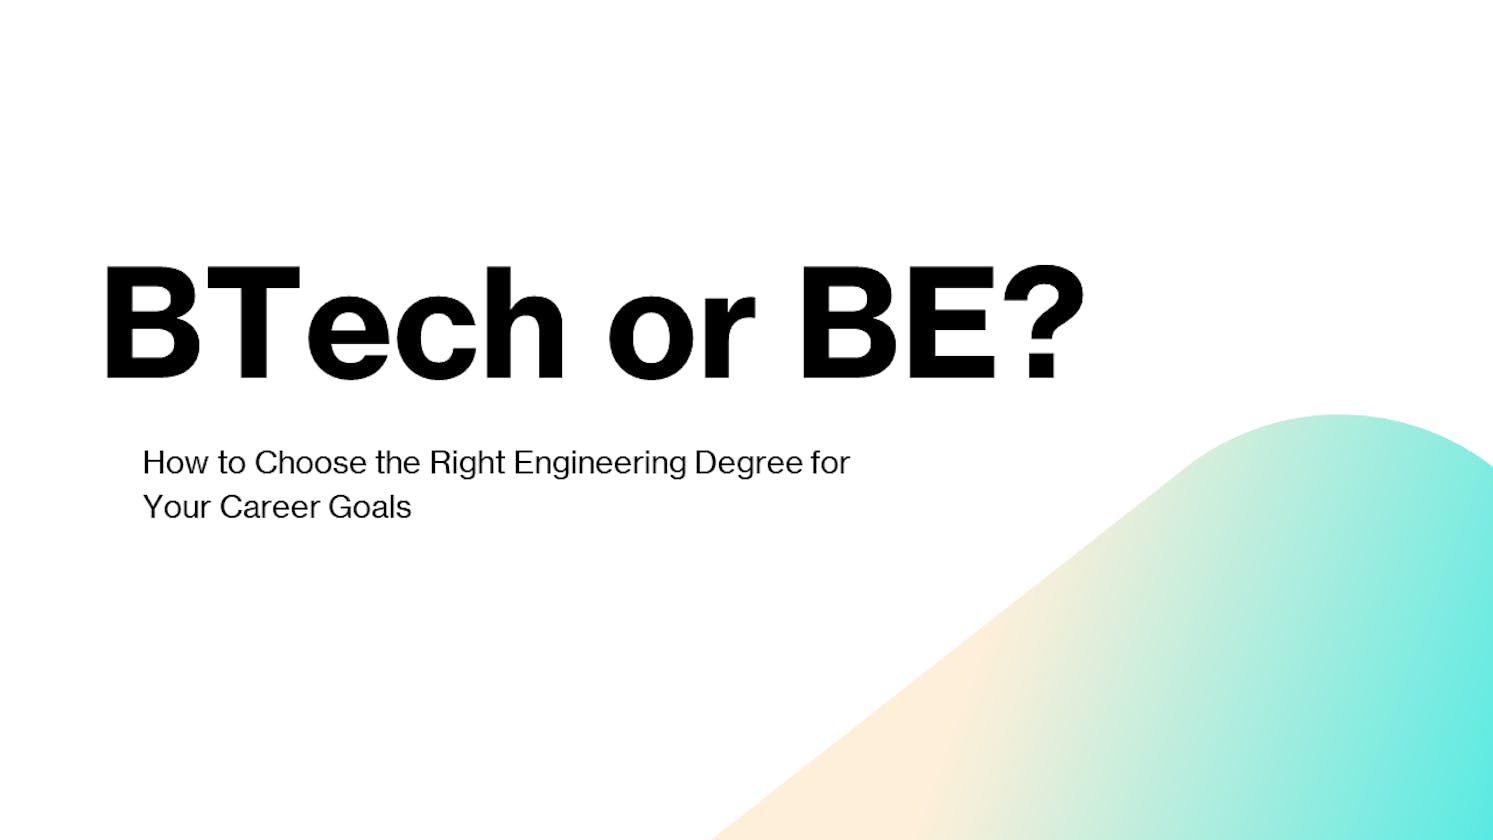 BTech vs BE: Which Engineering Degree is Right for You?